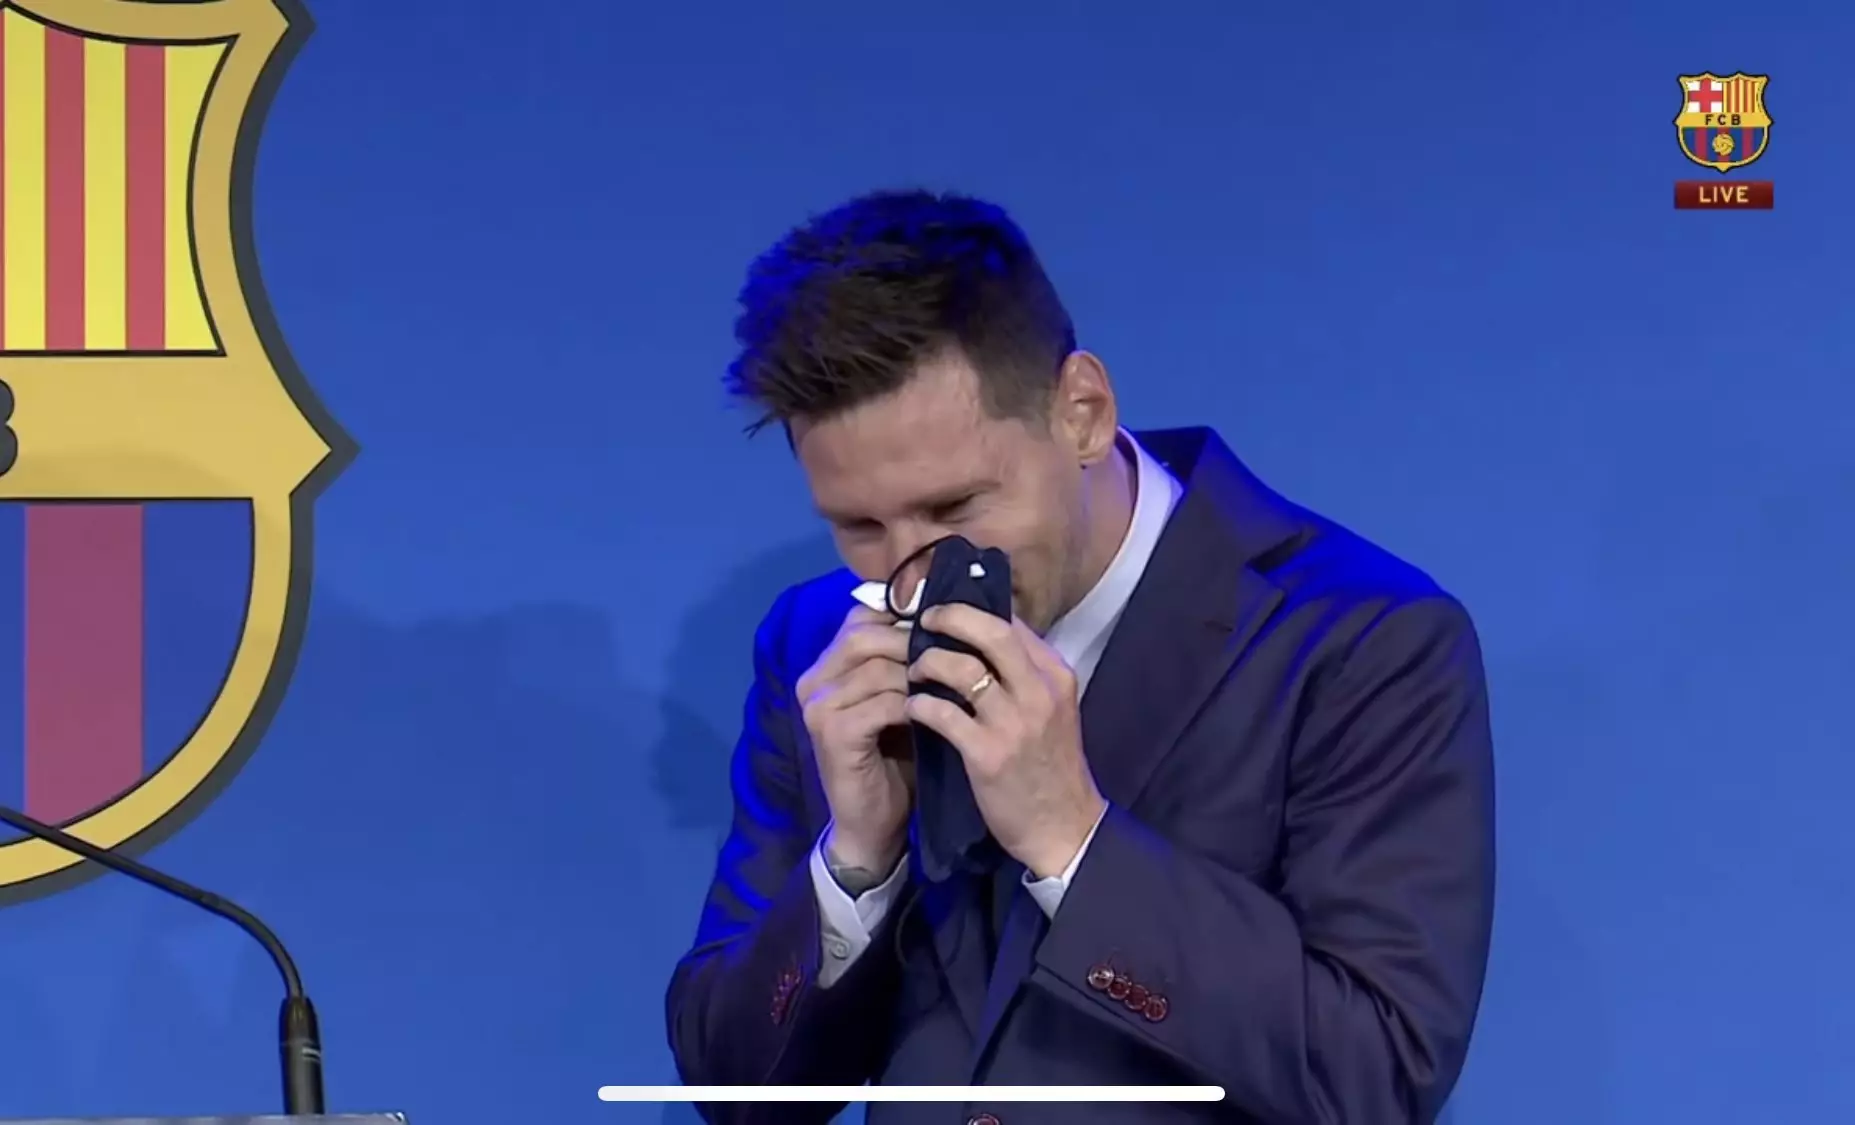 Messi was extremely emotional as he said goodbye. Image: FC Barcelona